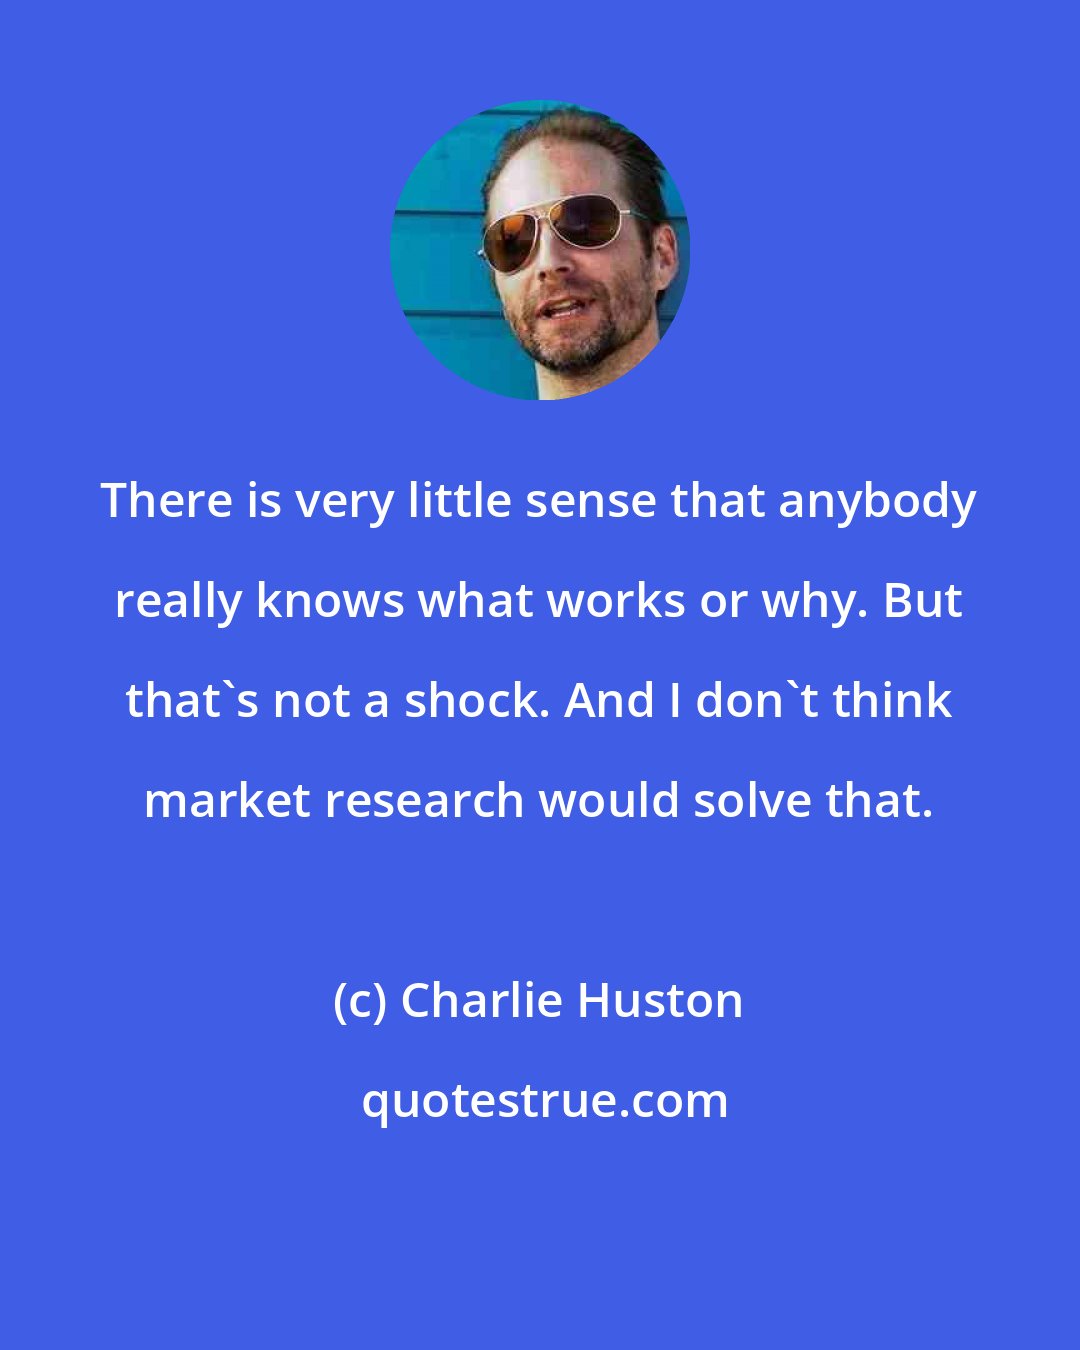 Charlie Huston: There is very little sense that anybody really knows what works or why. But that's not a shock. And I don't think market research would solve that.